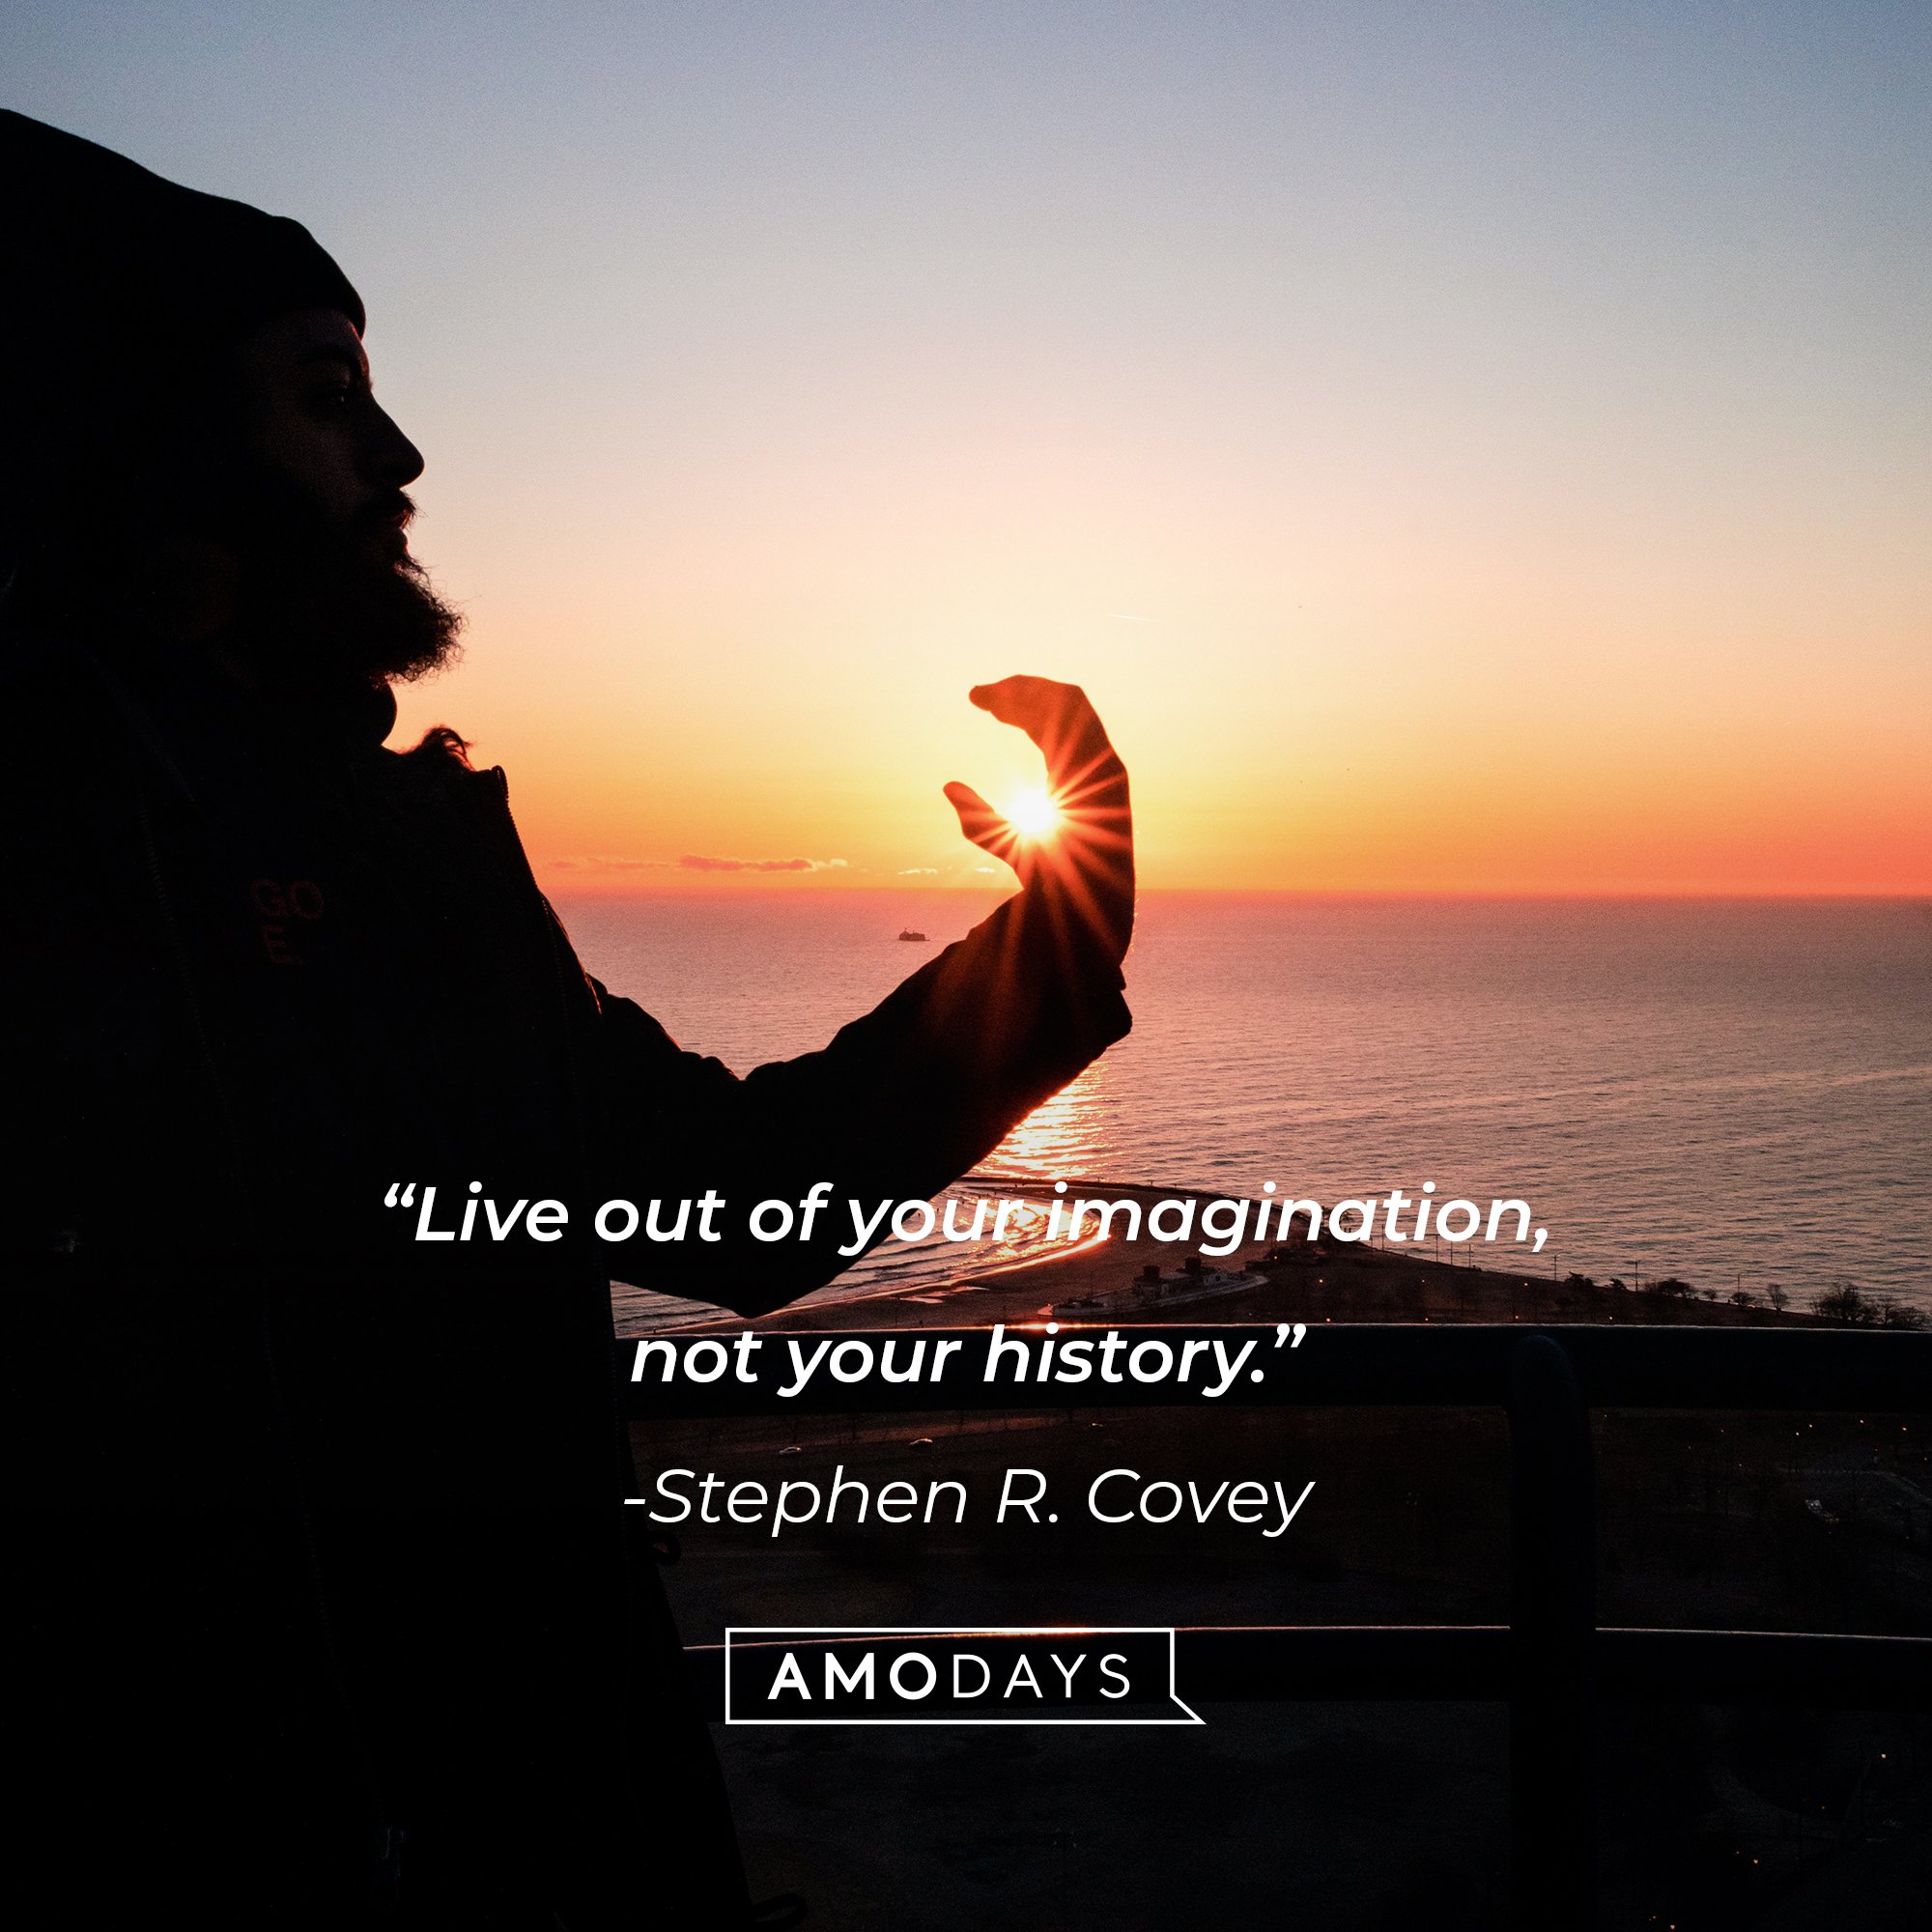  Stephen R. Covey's quote: “Live out of your imagination, not your history.” | Image: AmoDays